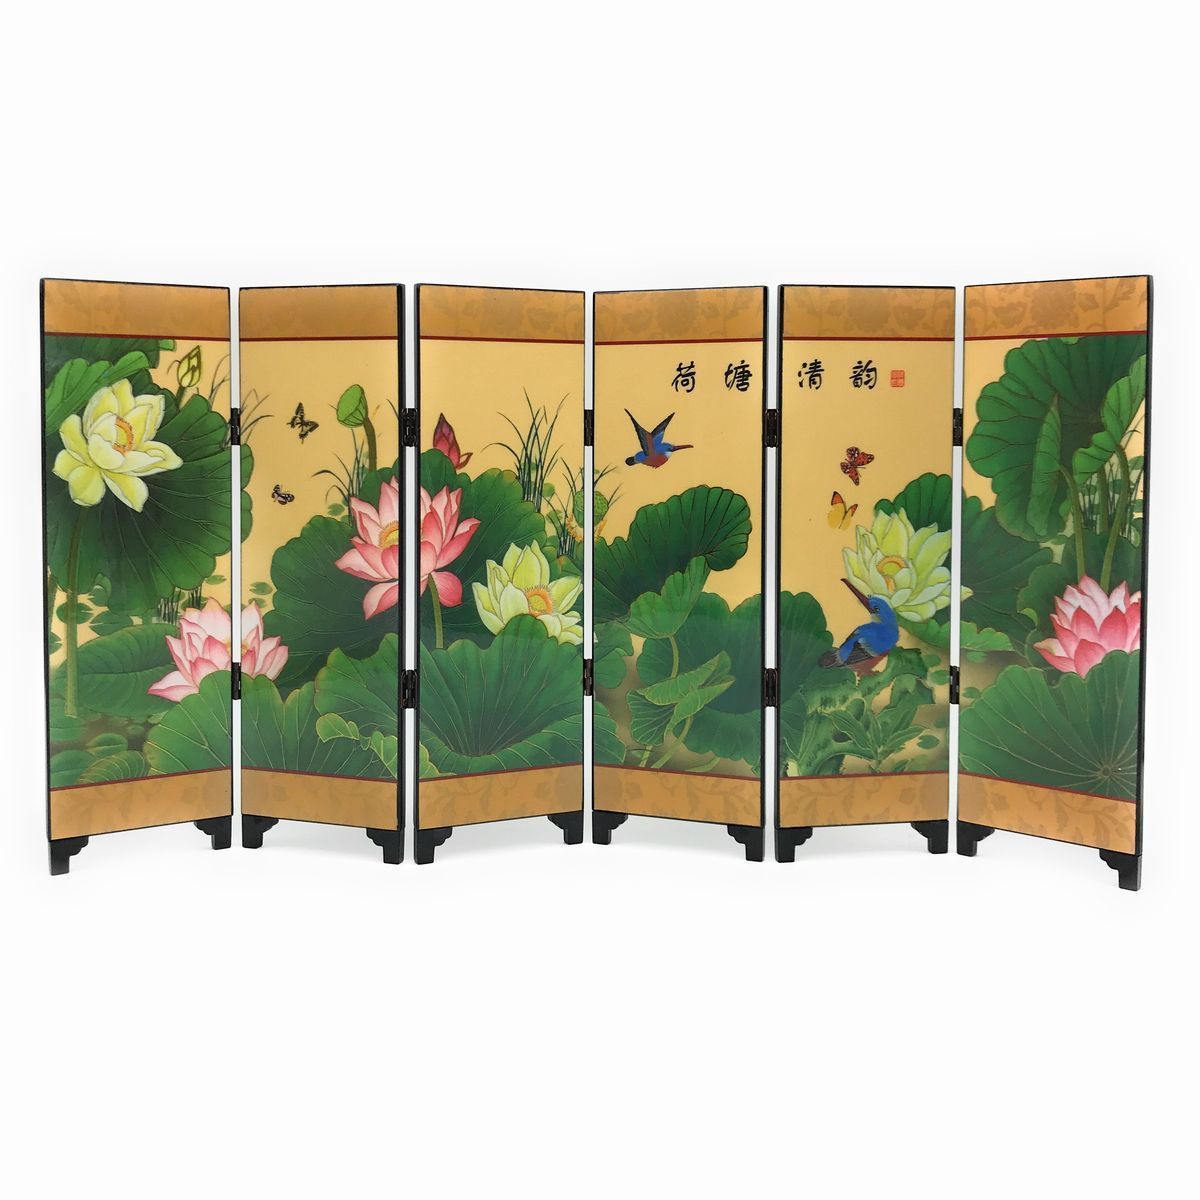  ornament folding screen manner picture Chinese lacquer coating manner desk size ( is s. .)